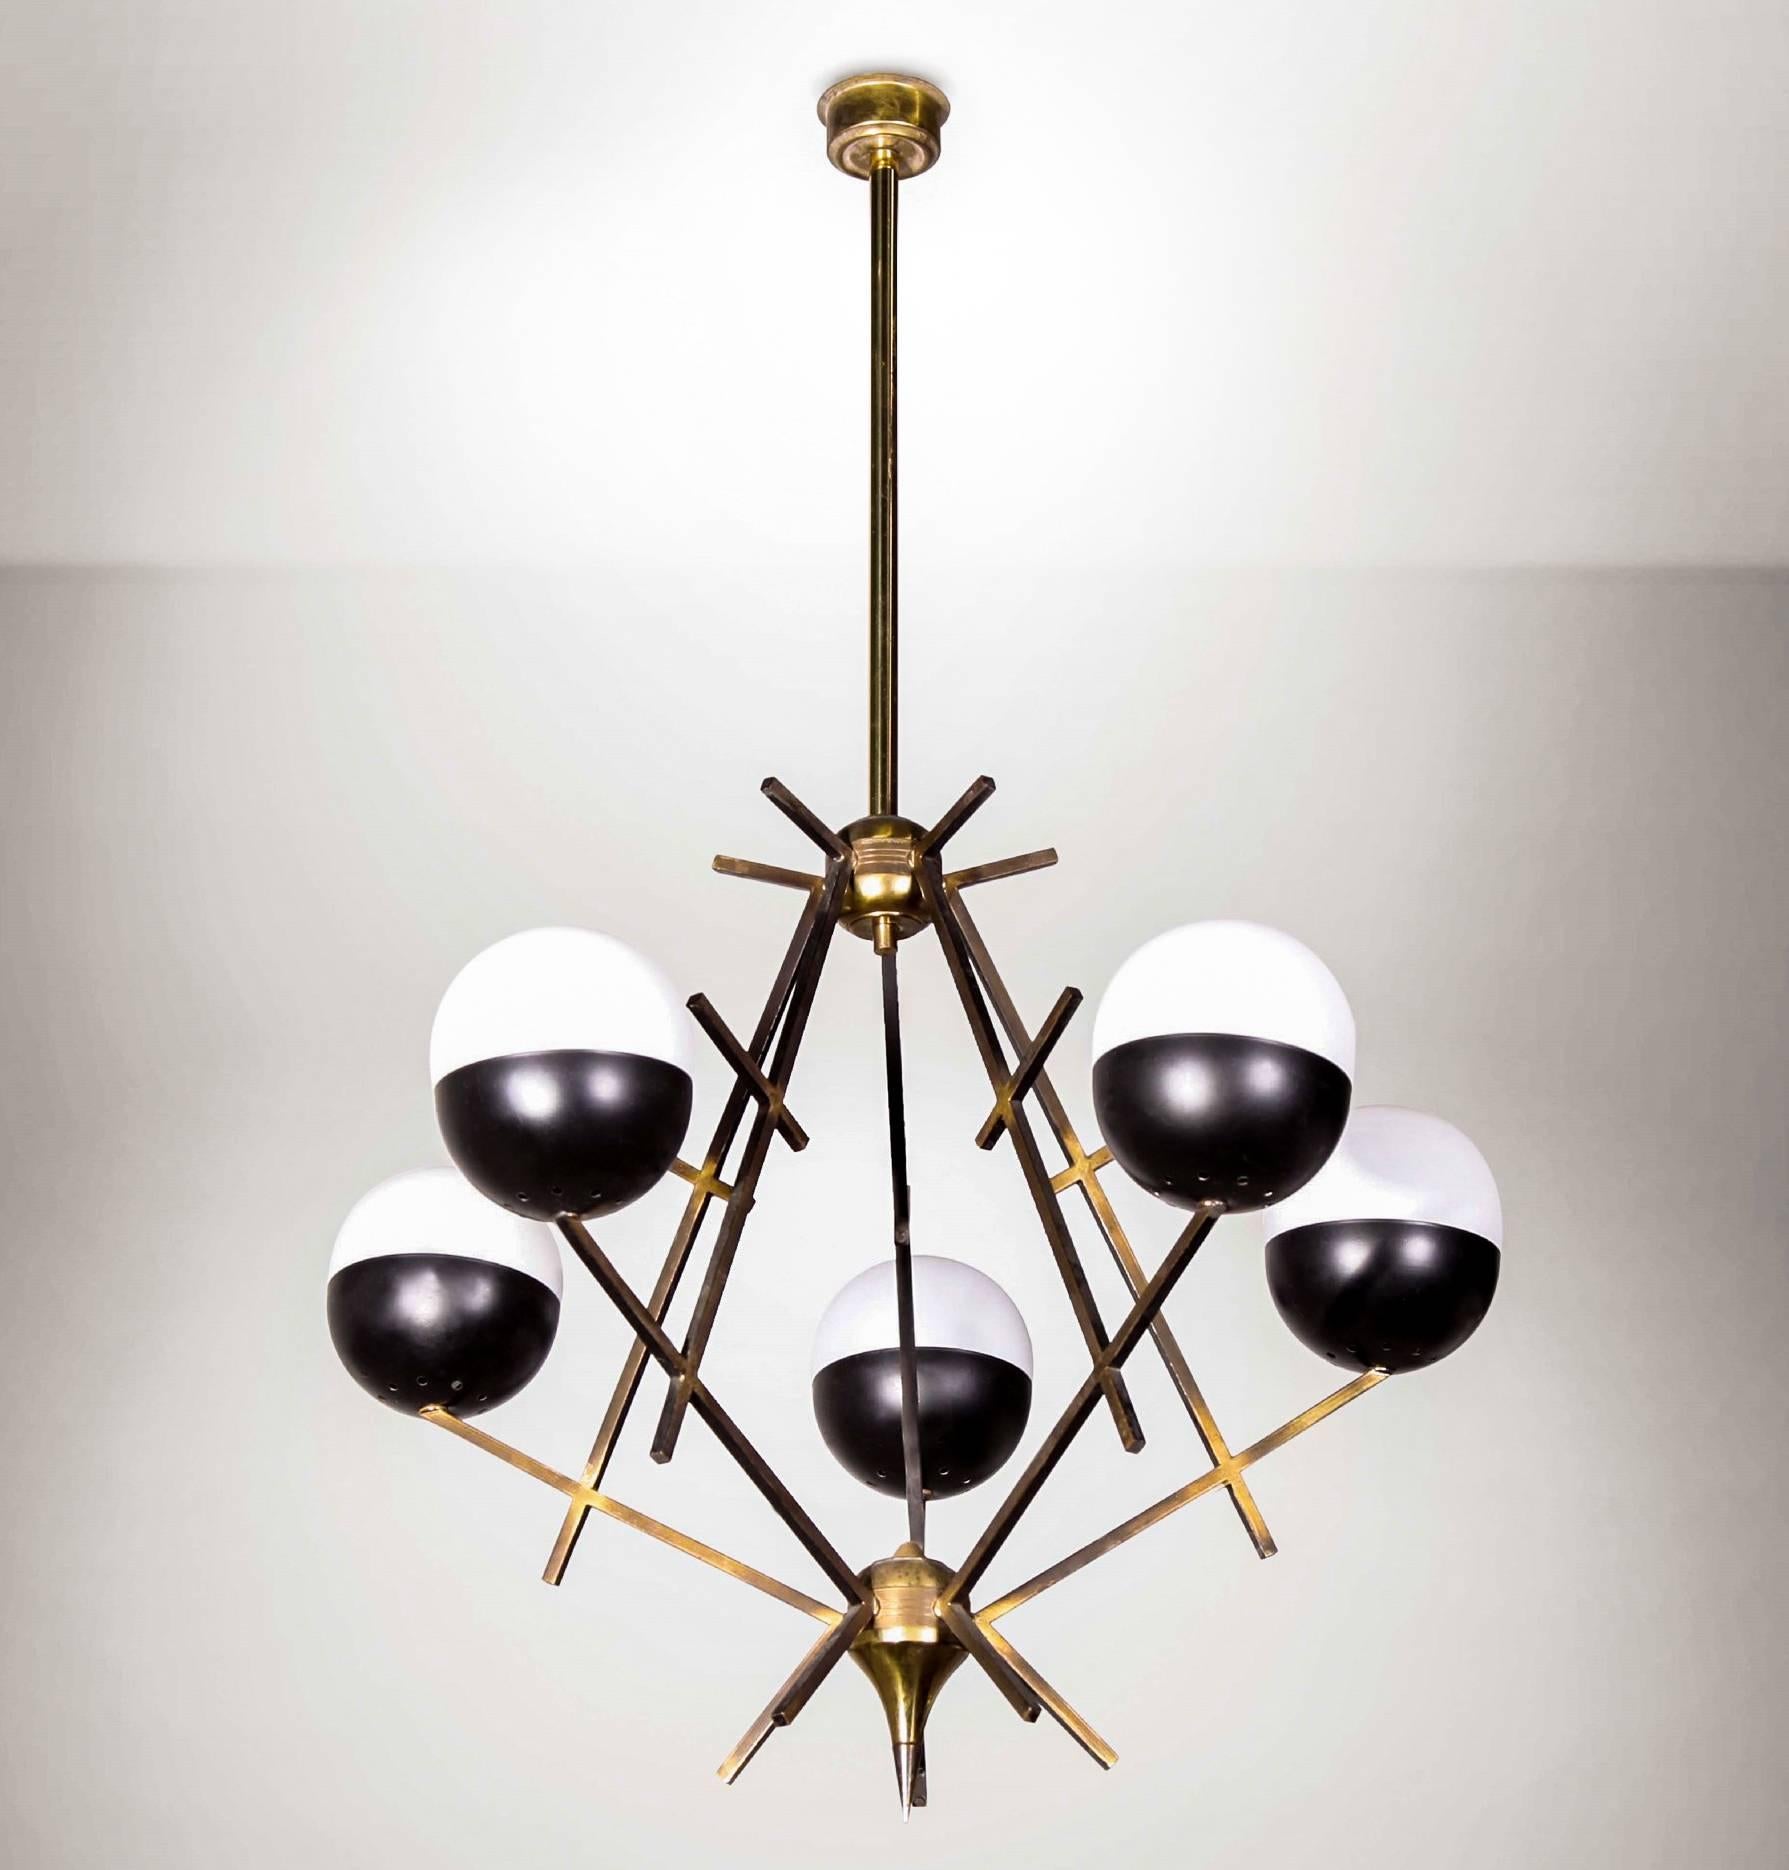 Original production Stilnovo mid-1950s suspension light with architectural lacquered brass structured frame and five aluminium black painted cups each holding opaline glass diffusers. Made in Milan, Italy. 

Wired and tested in the UK.